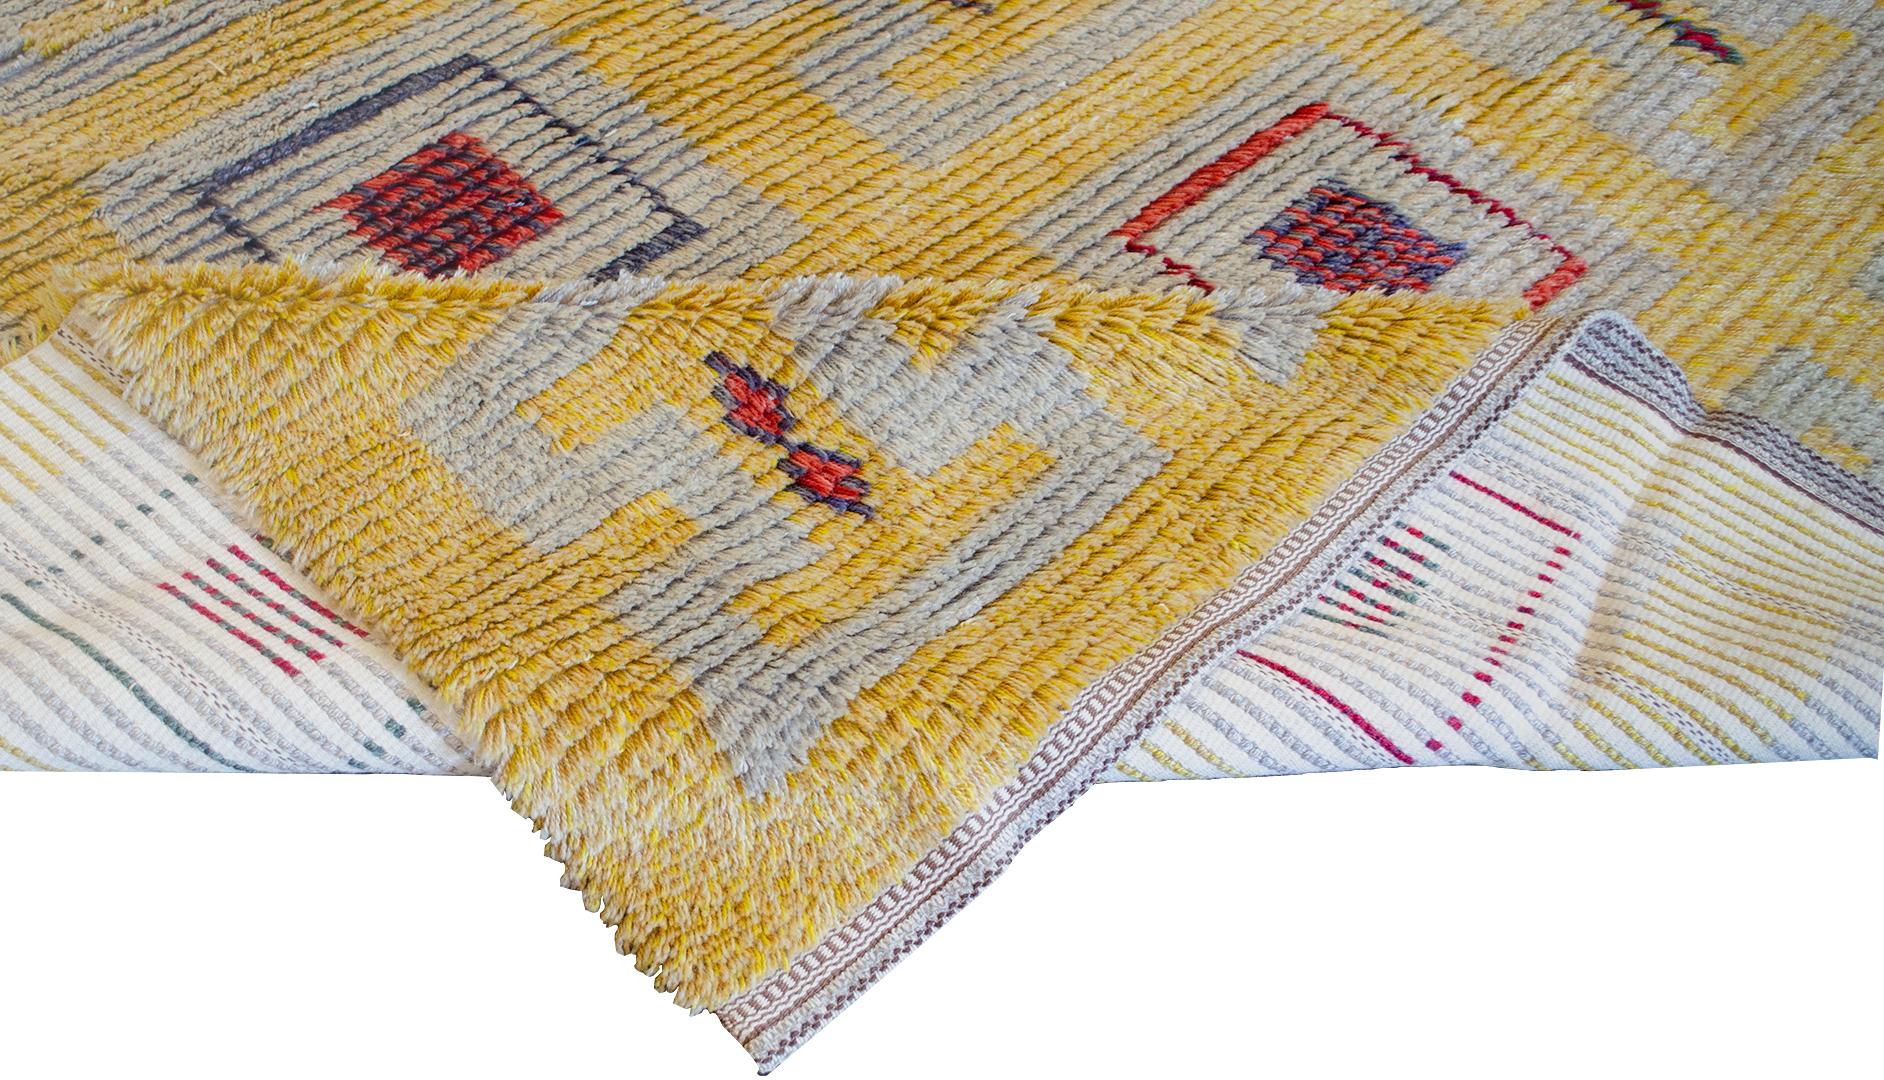 This traditional handwoven wool midcentury Swedish deco pile rug has alternating rows of checkered geometric pendants on a butter yellow field. Signed by the weaver/design studio.